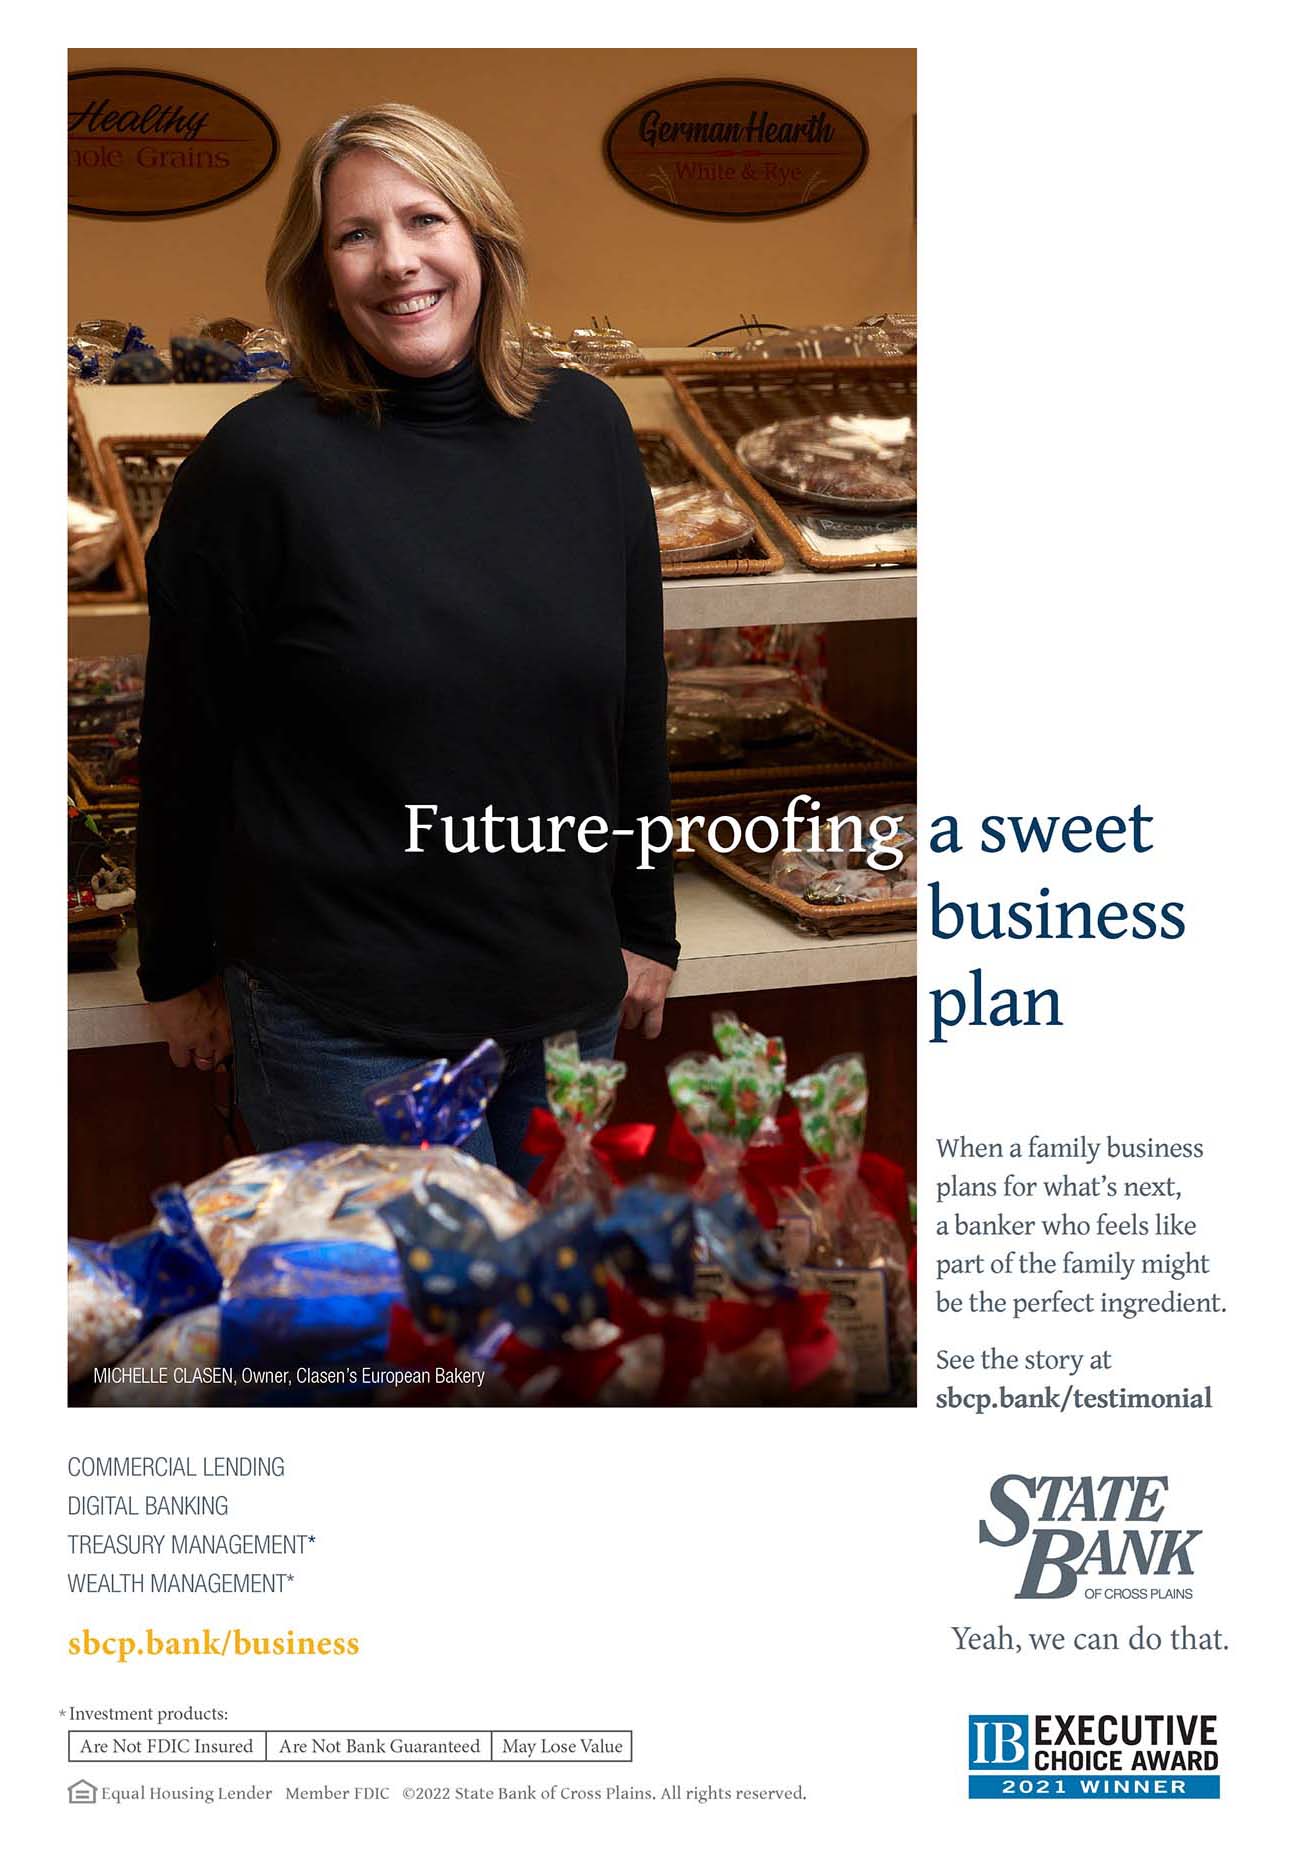 State Bank of Cross Plains print ad for Clasen's bakery